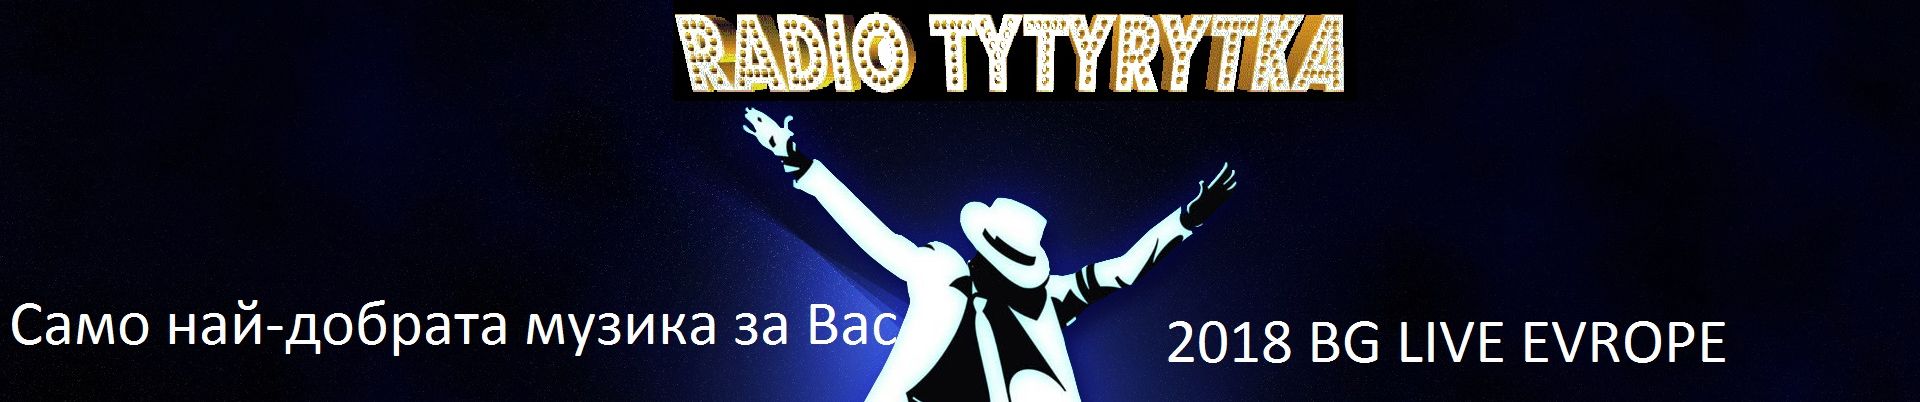 Stream Radio TyTyRyTKA DUPKA music | Listen to songs, albums, playlists for  free on SoundCloud